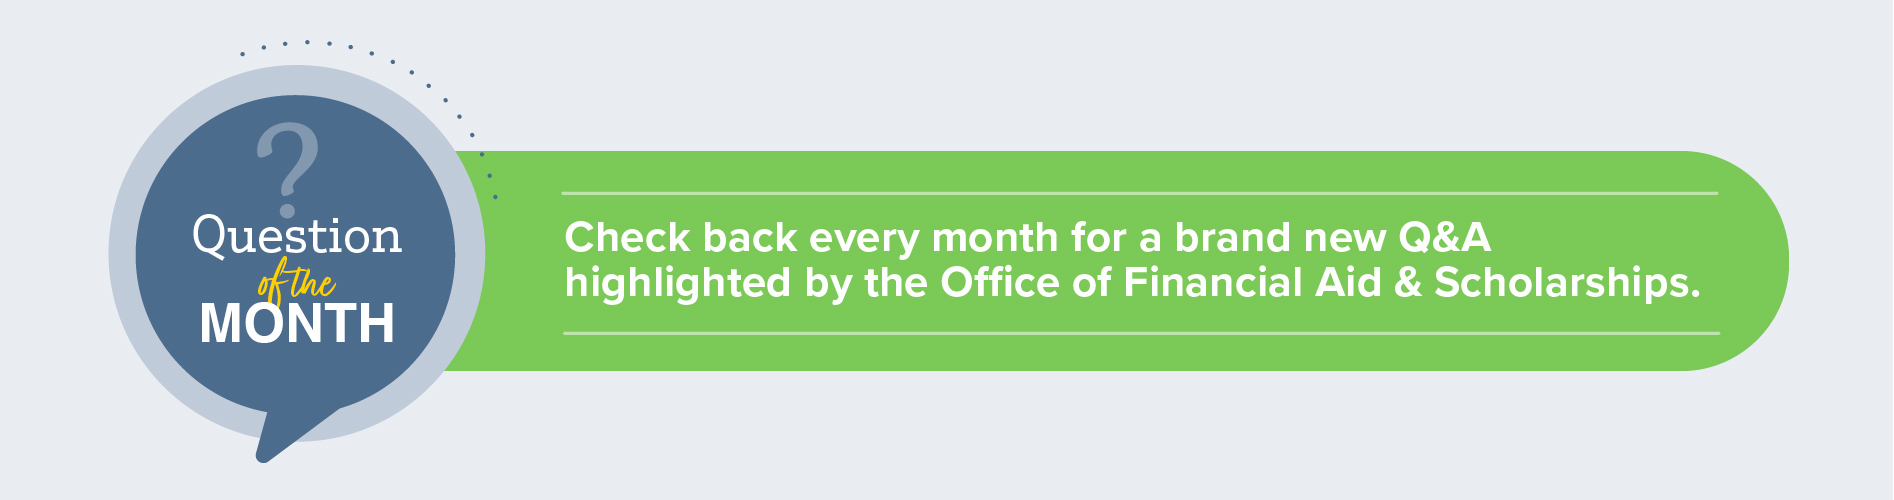 Financial aid question of the month header graphic